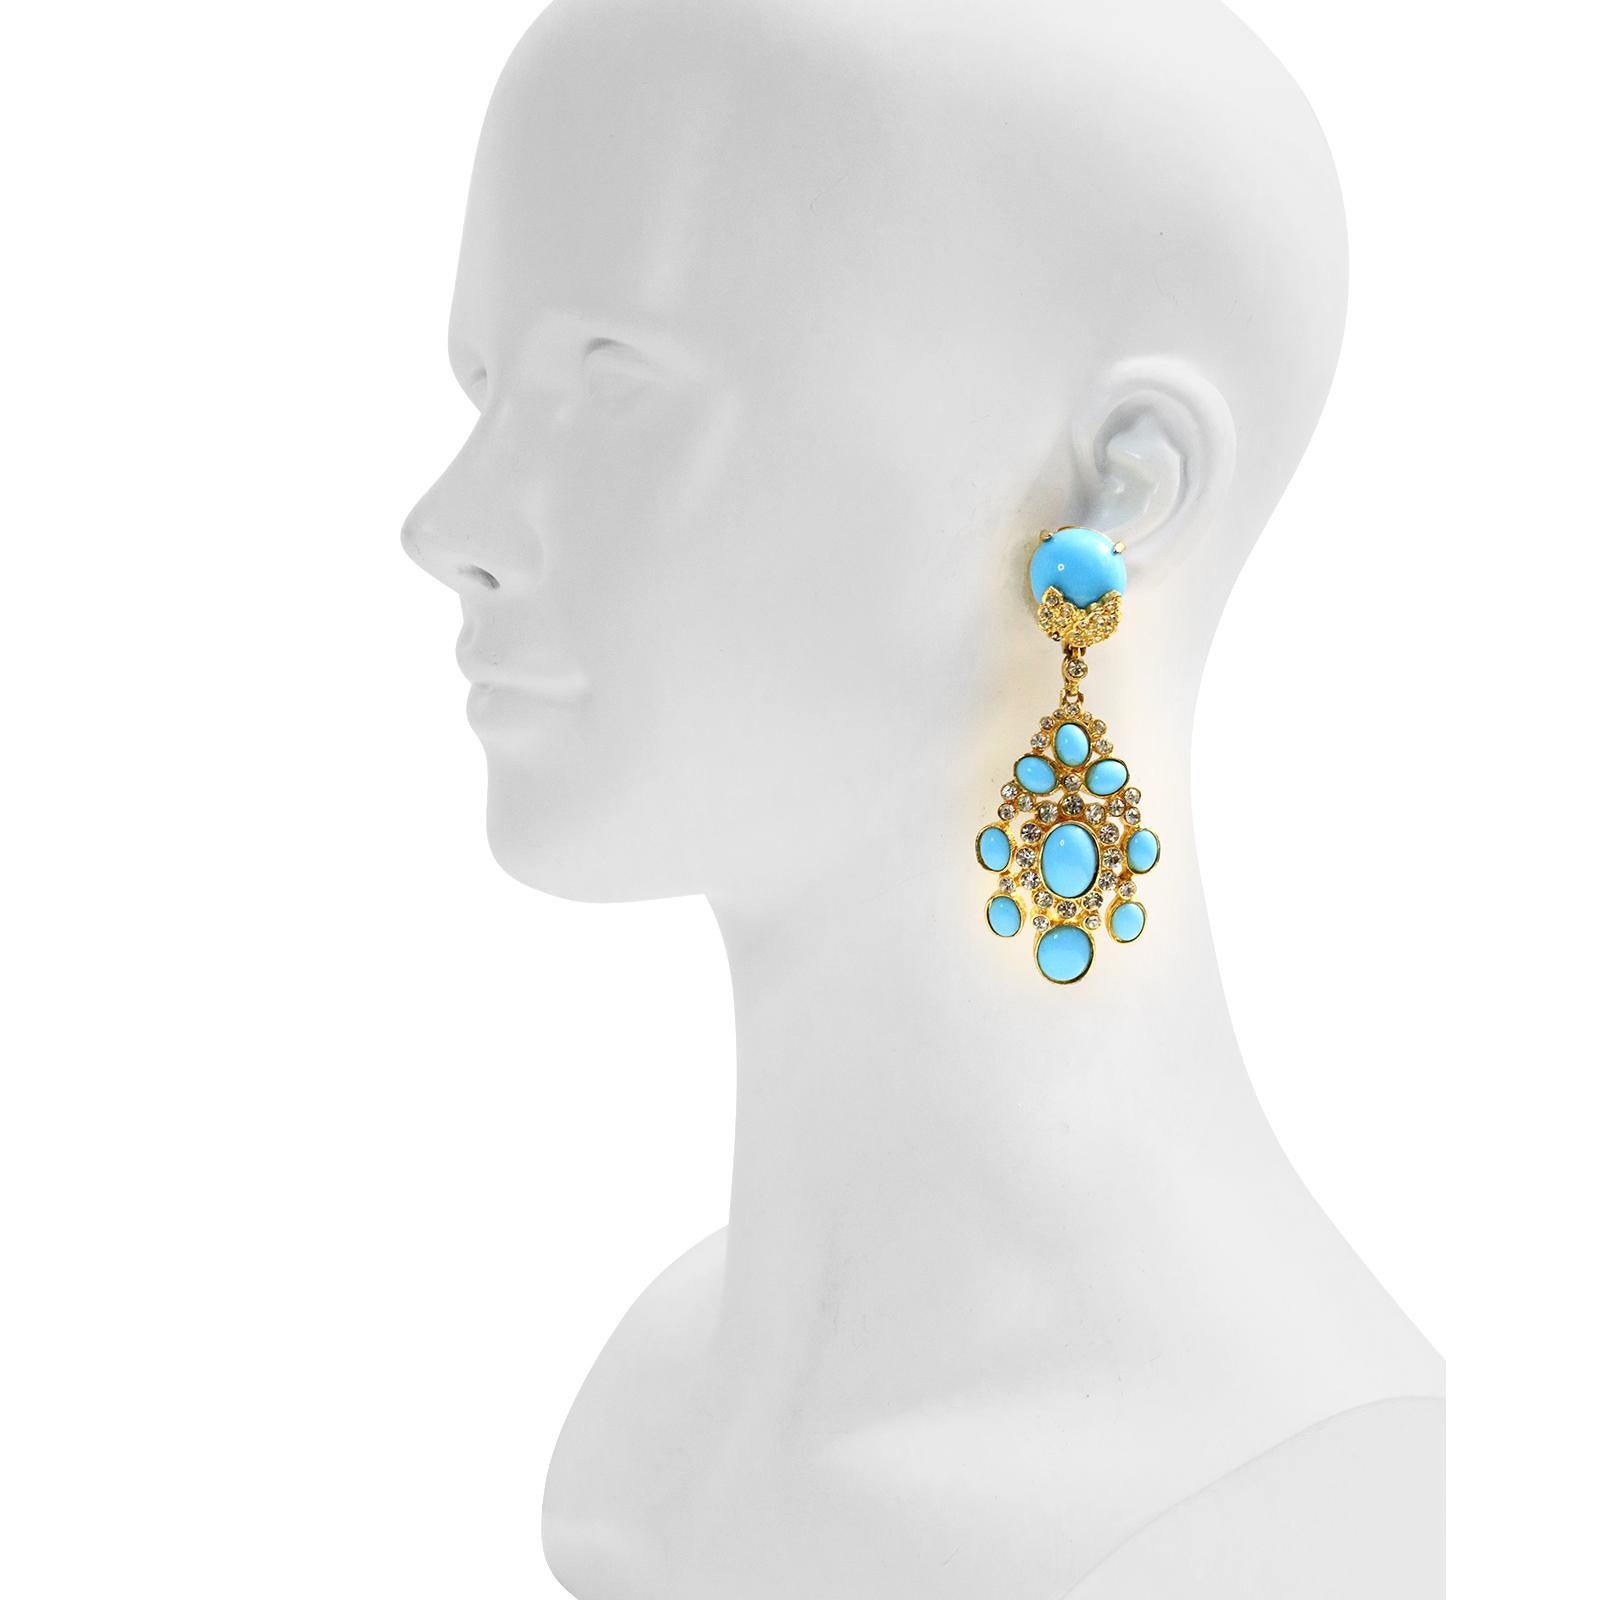 Vintage Cadoro Gold with Faux Turquoise Dangling Earrings Circa 1980s.  These are in a front facing mogul inspired design of gold, faux turquoise and diamante.  They are so special.  Substantial and well made. I have always liked Cadoro and I know